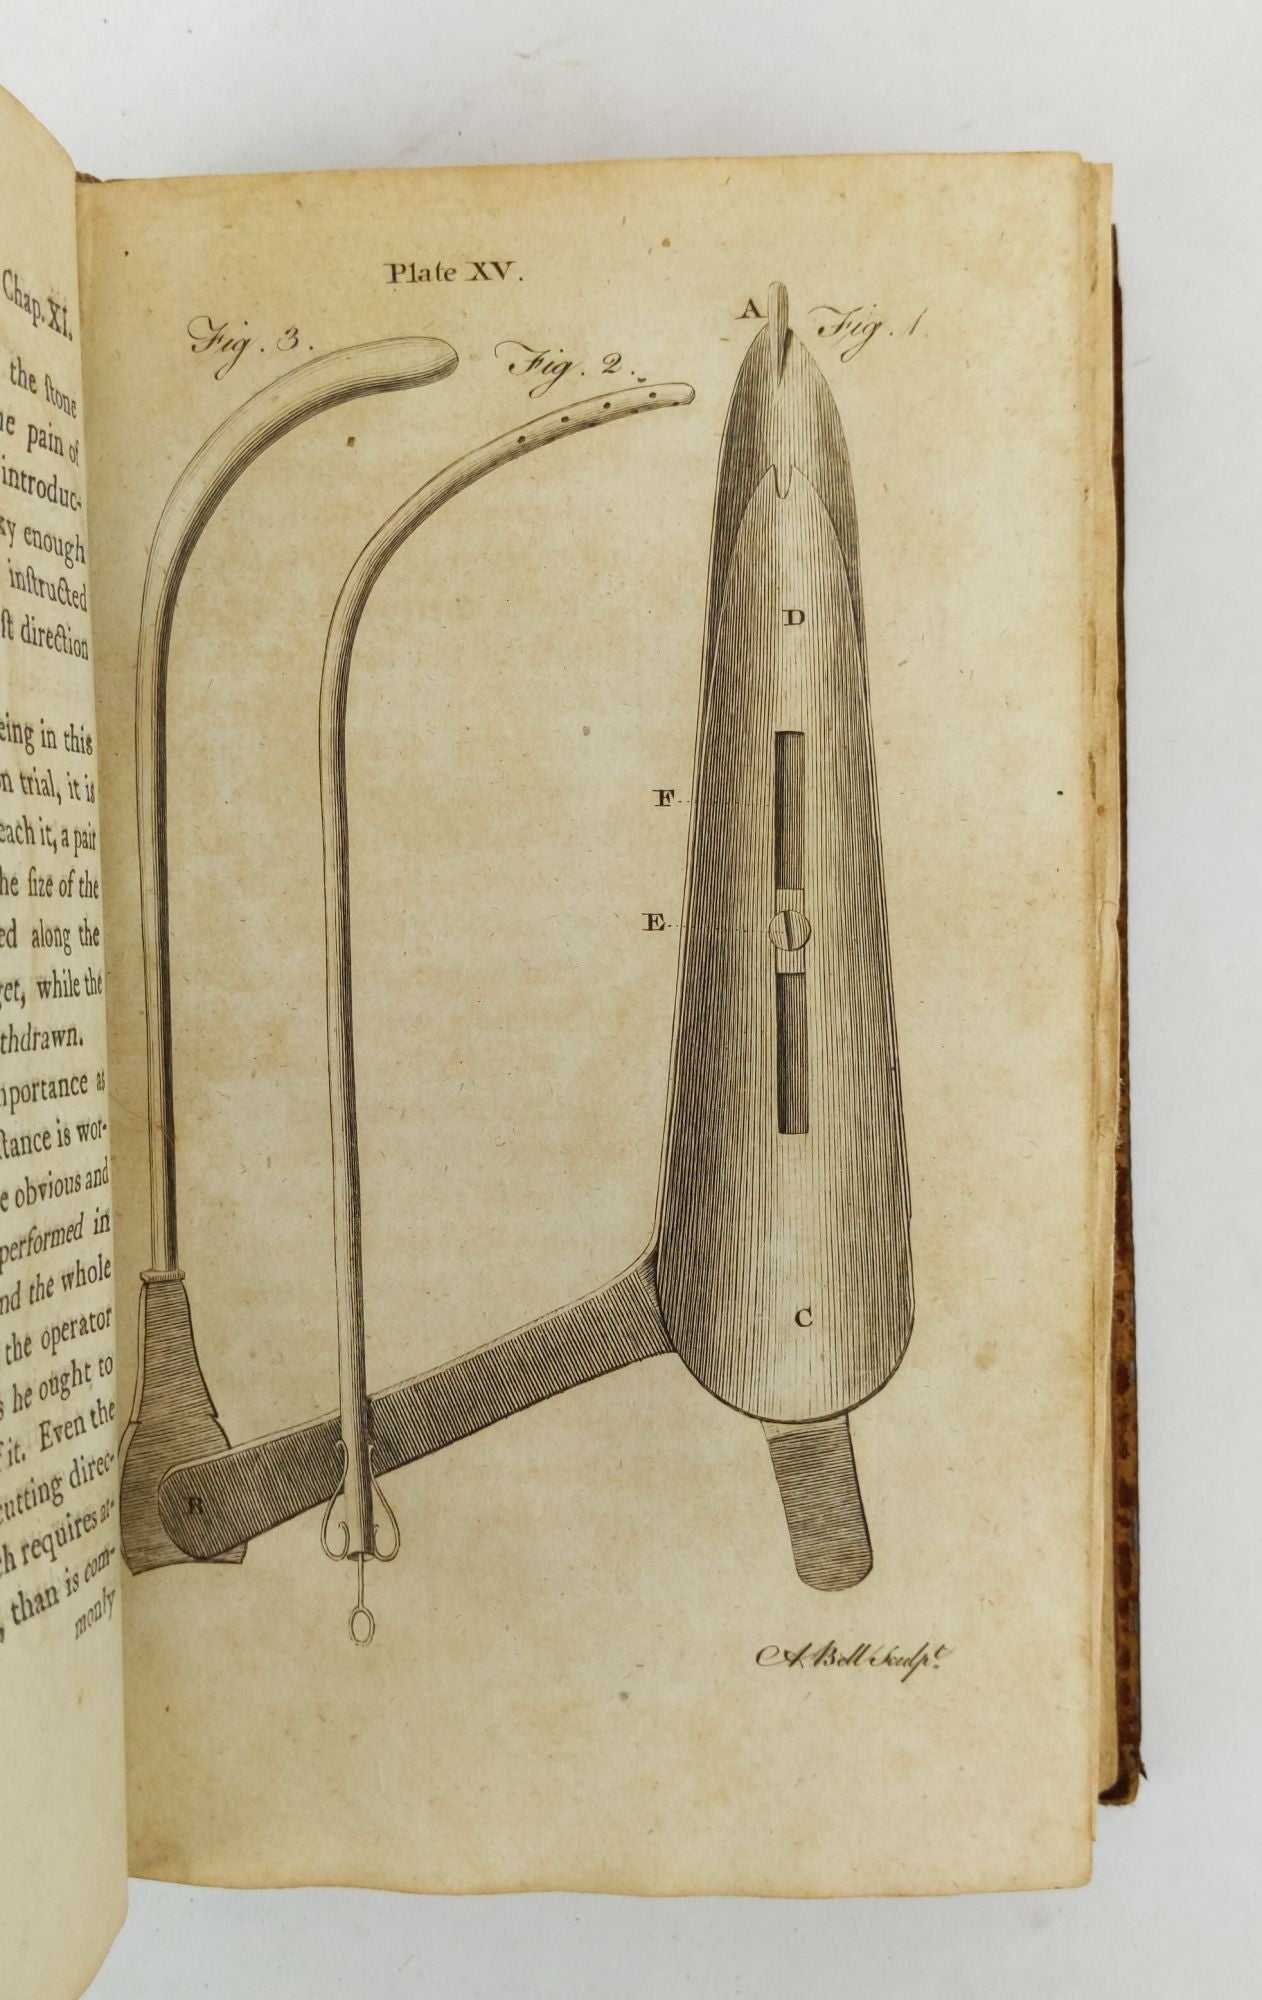 Product Image for A SYSTEM OF SURGERY. ILLUSTRATED WITH COPPERPLATES [Volumes II - III, Only]